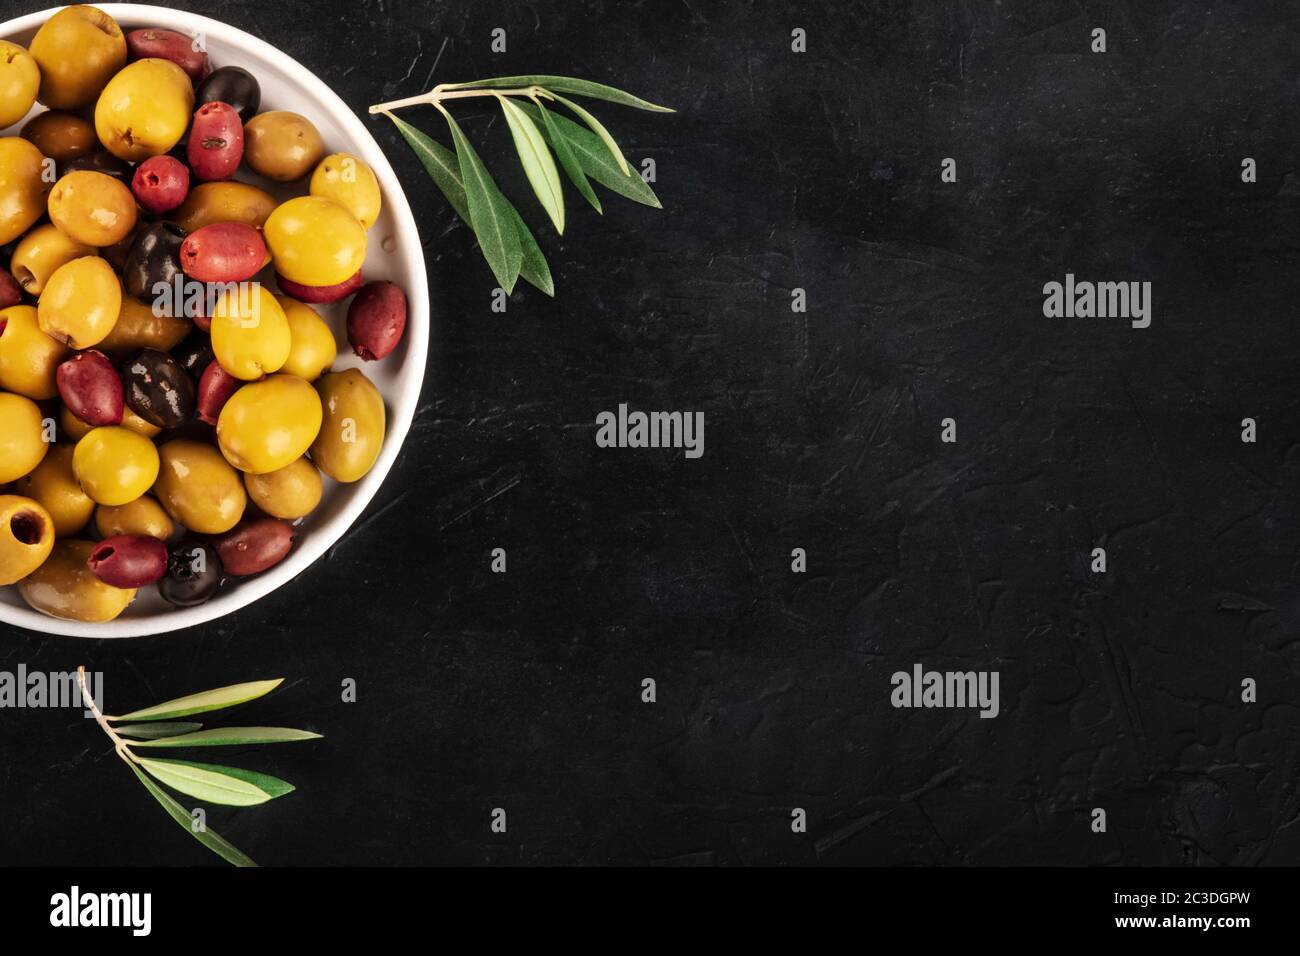 Olives assortment design template. Black, green and red olives, shot from the top on a black background with a place for text Stock Photo